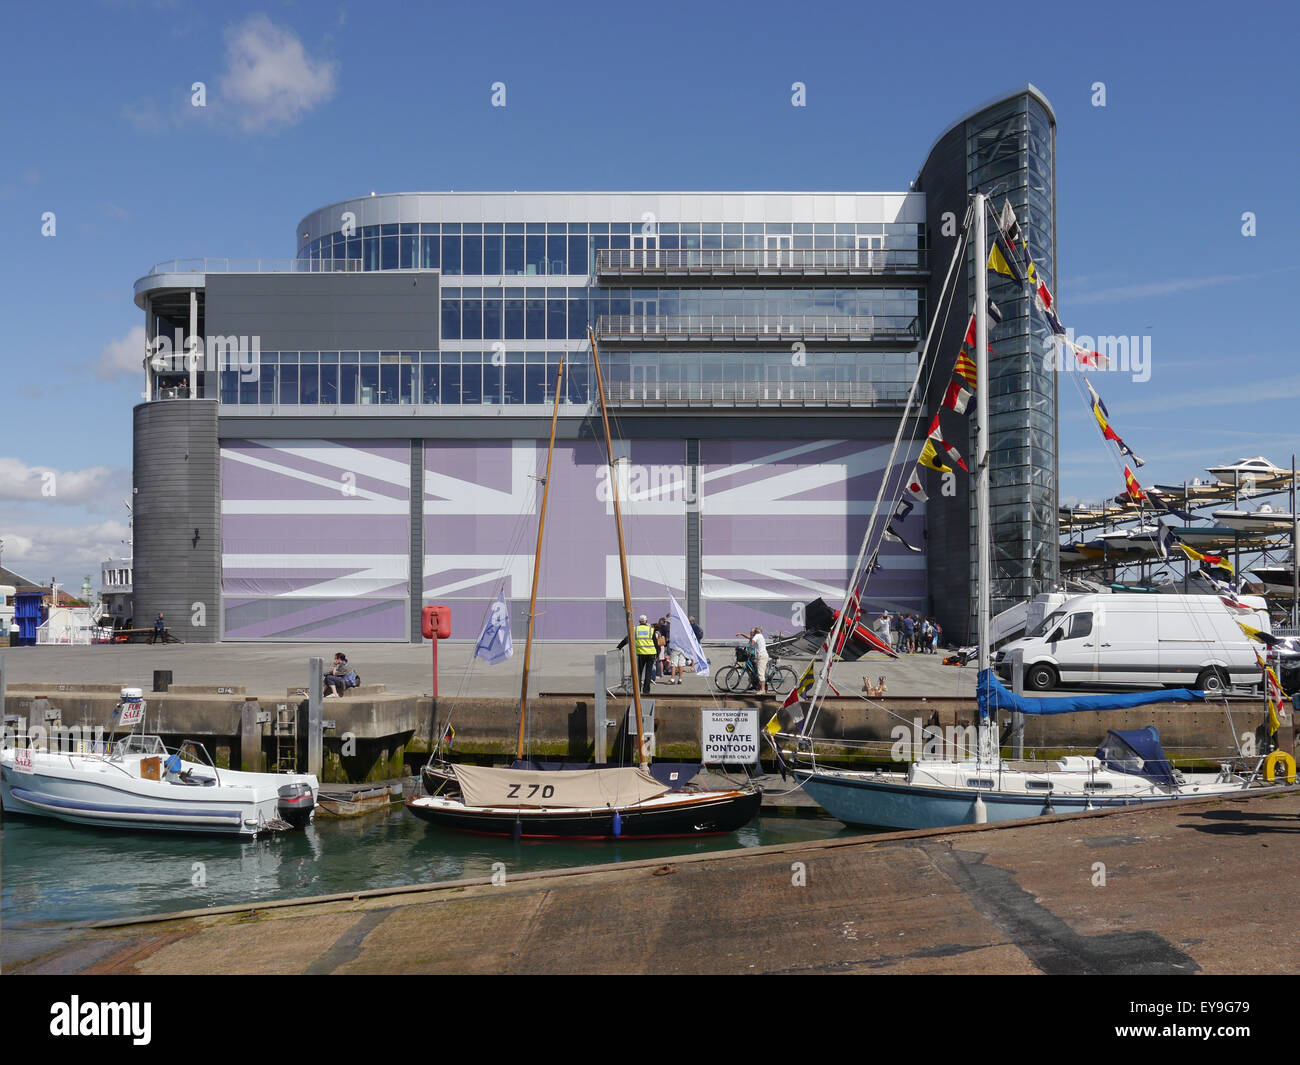 The Ben Ainslie Racing Headquarters in Old Portsmouth, Hampshire, England Stock Photo